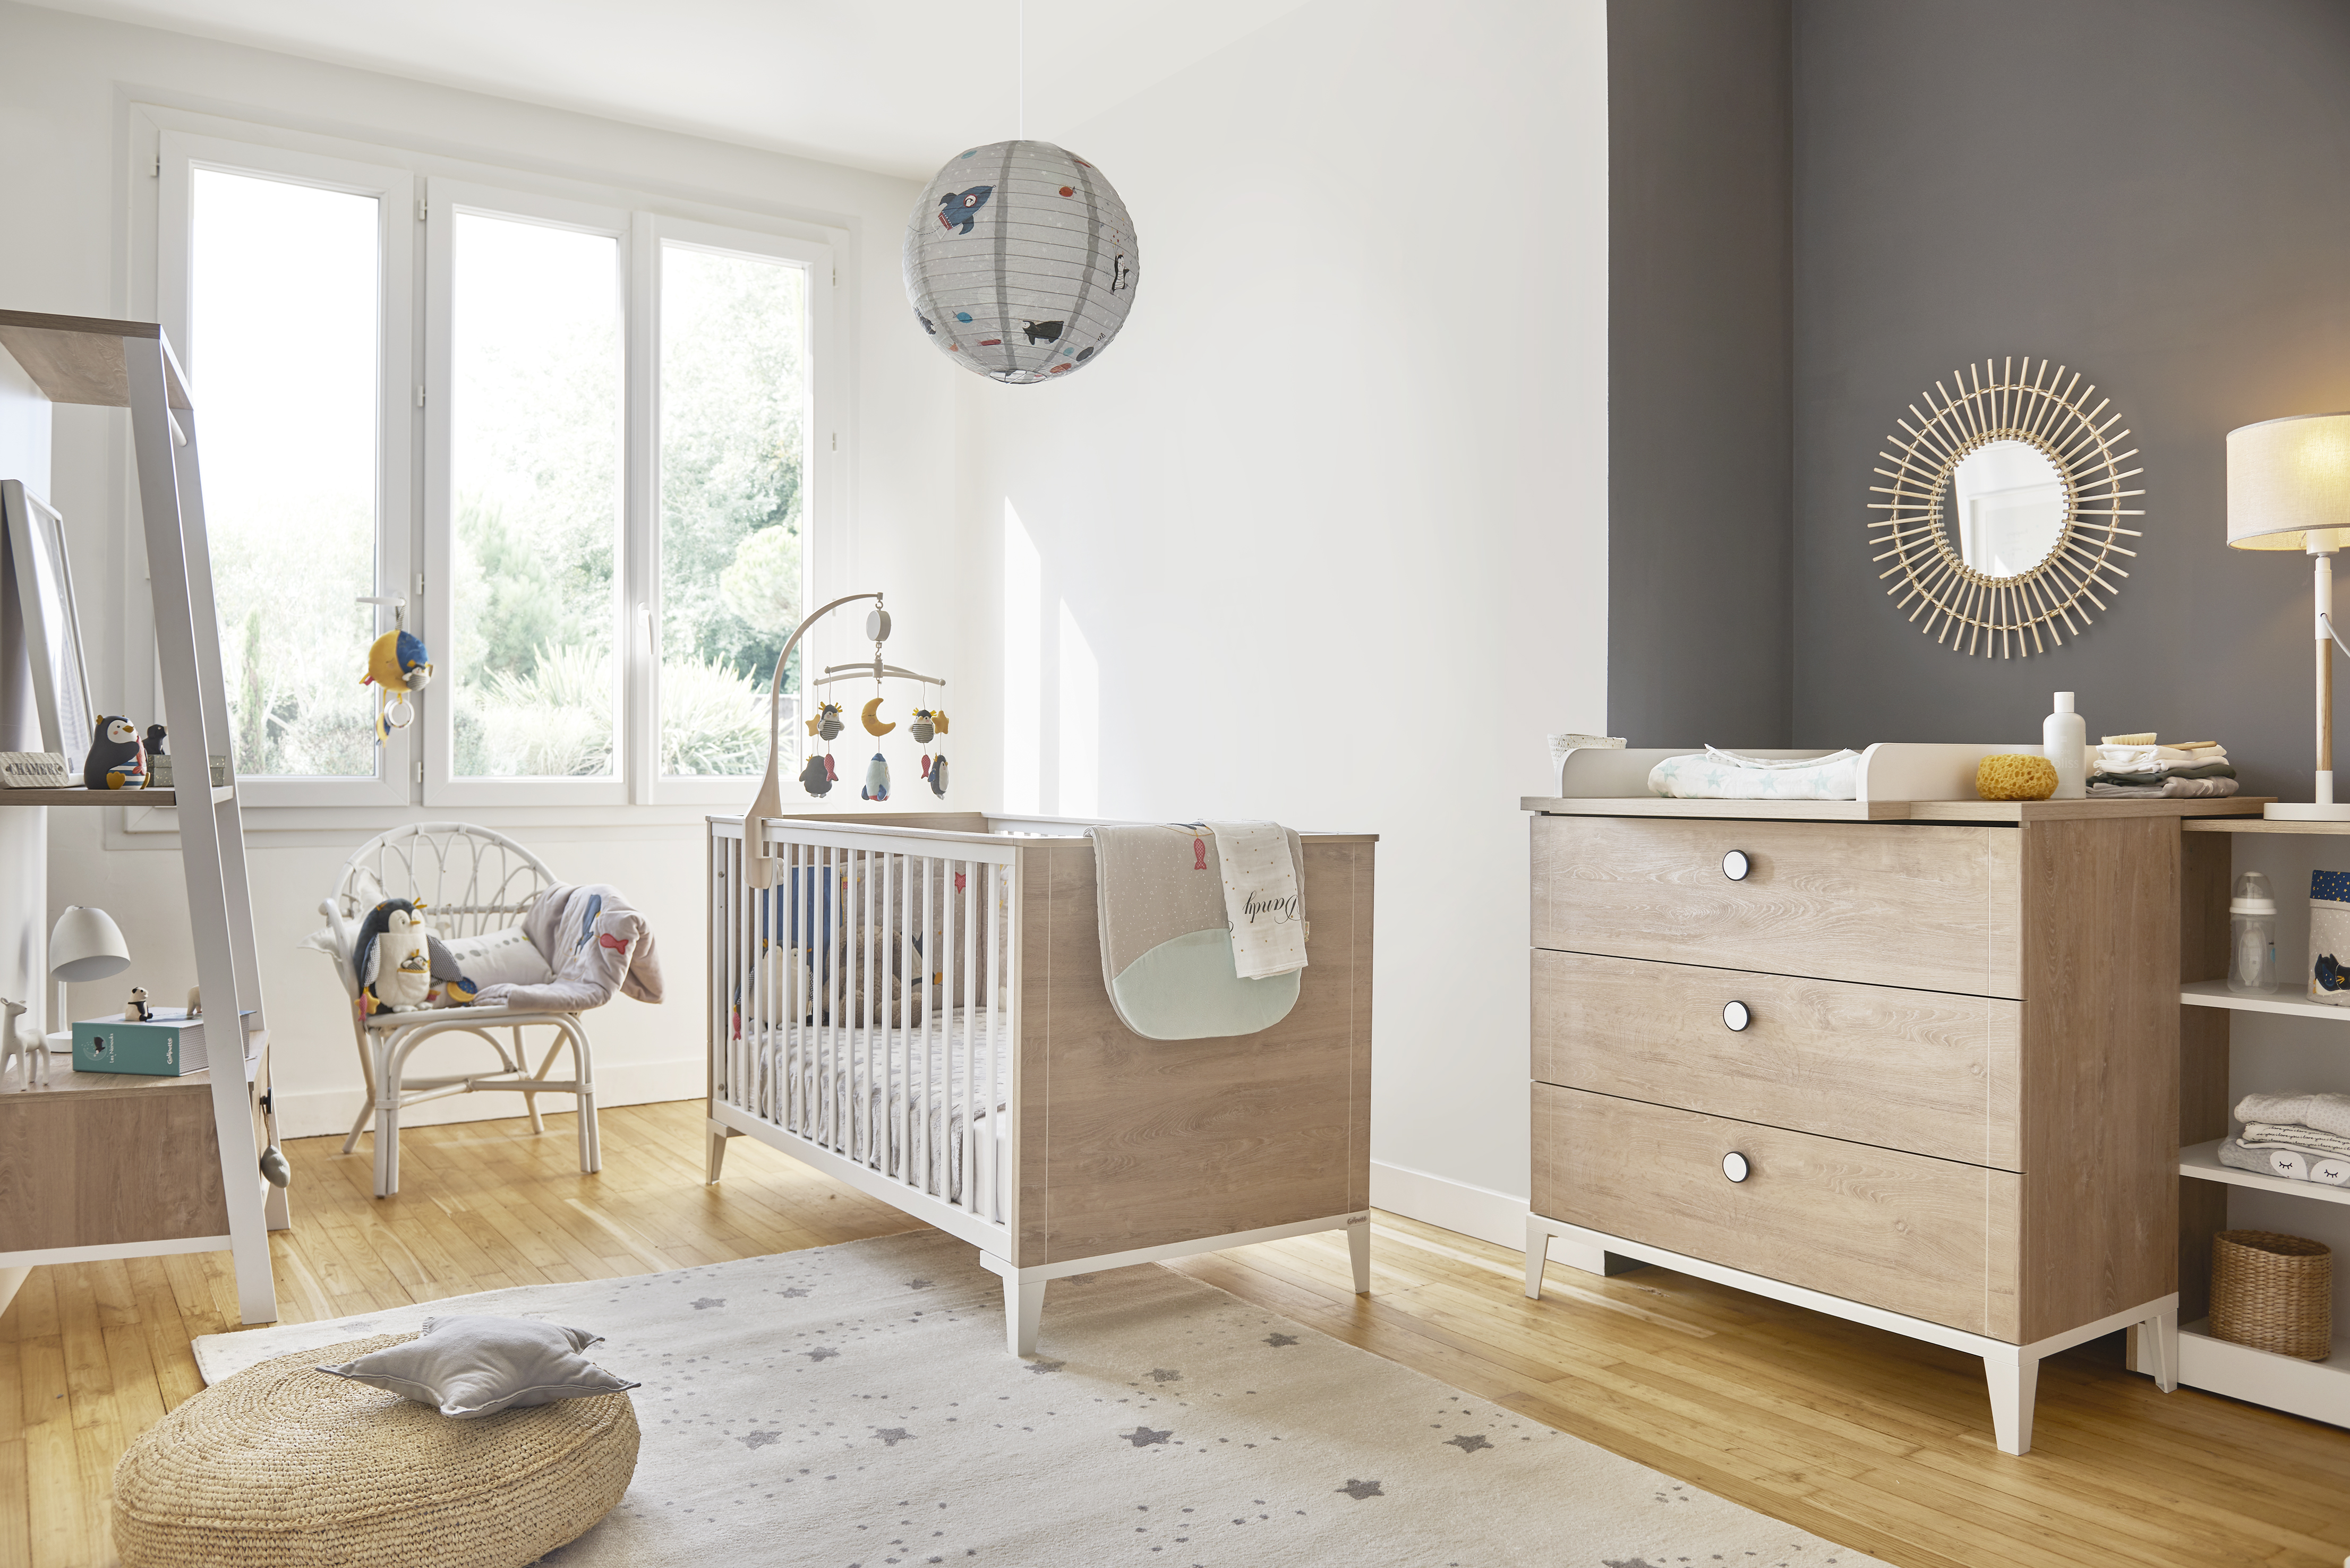 4 Reasons Why You Should Use A Cot For Your Baby